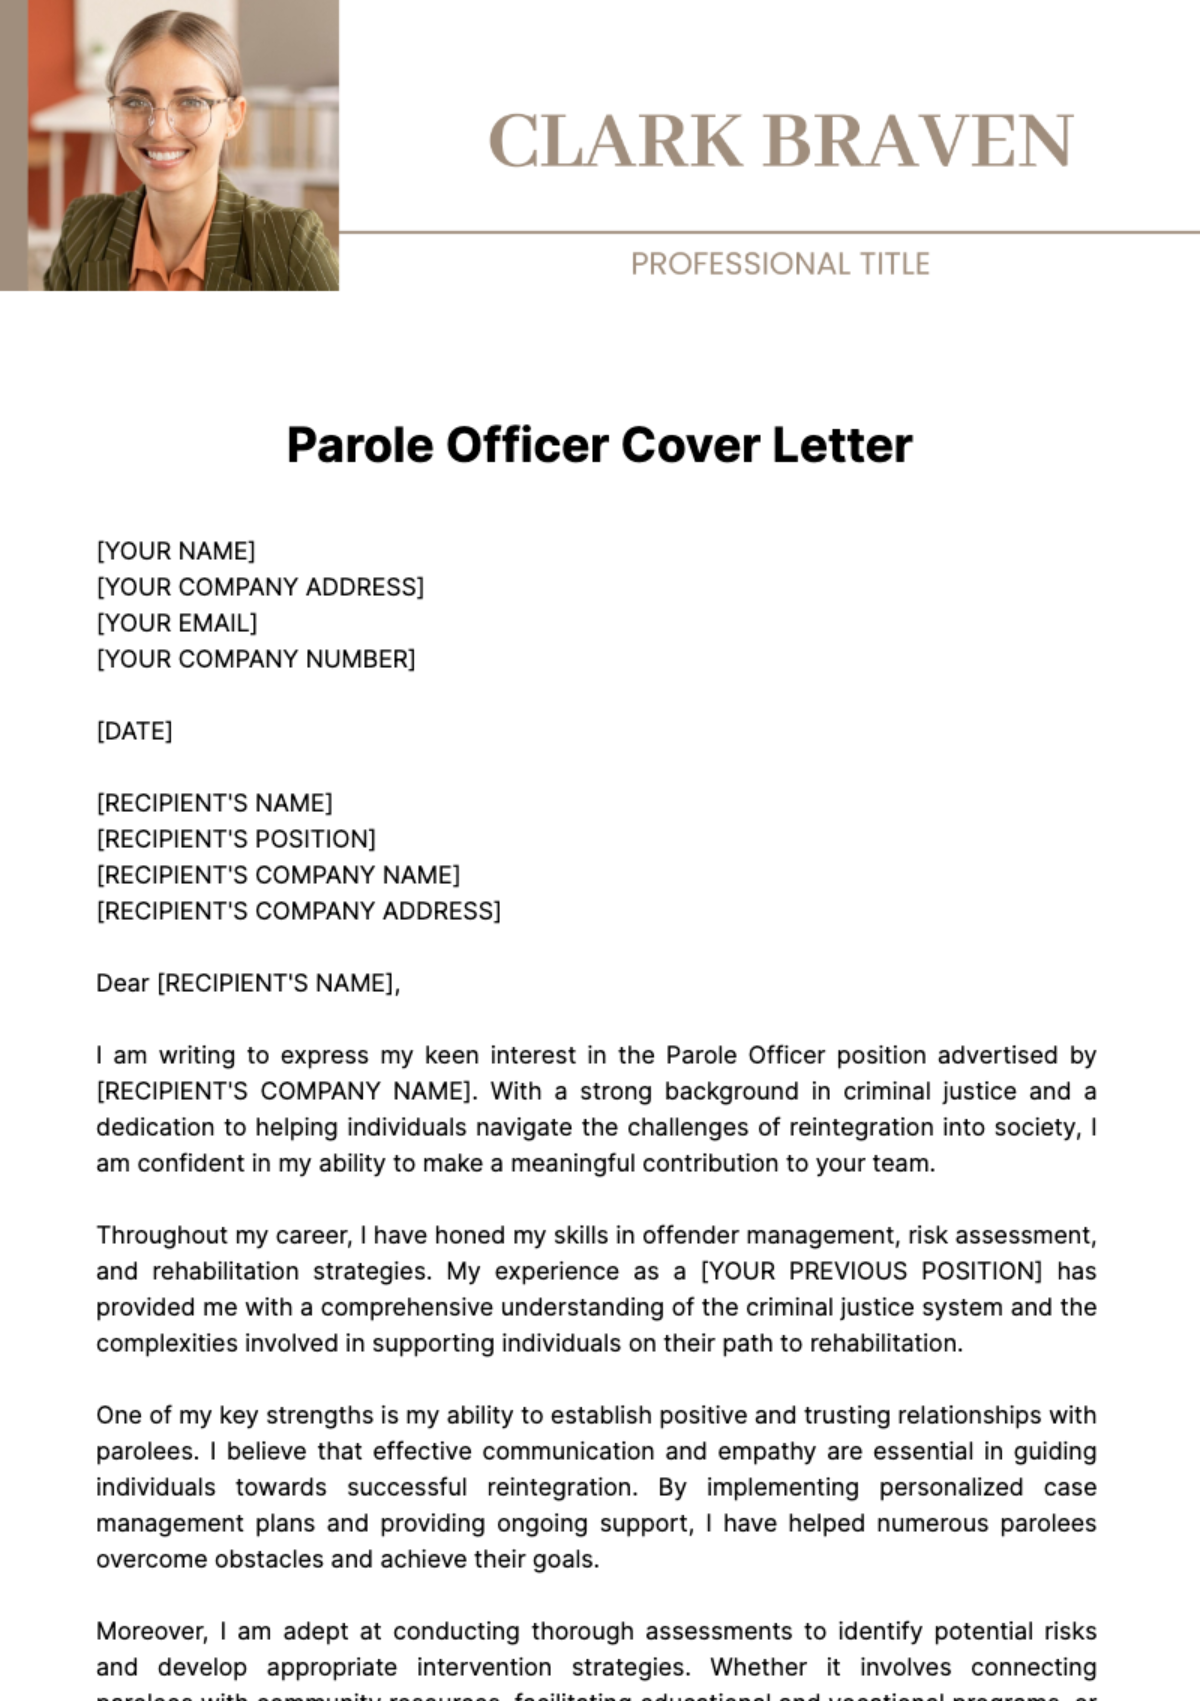 Free Parole Officer Cover Letter Template